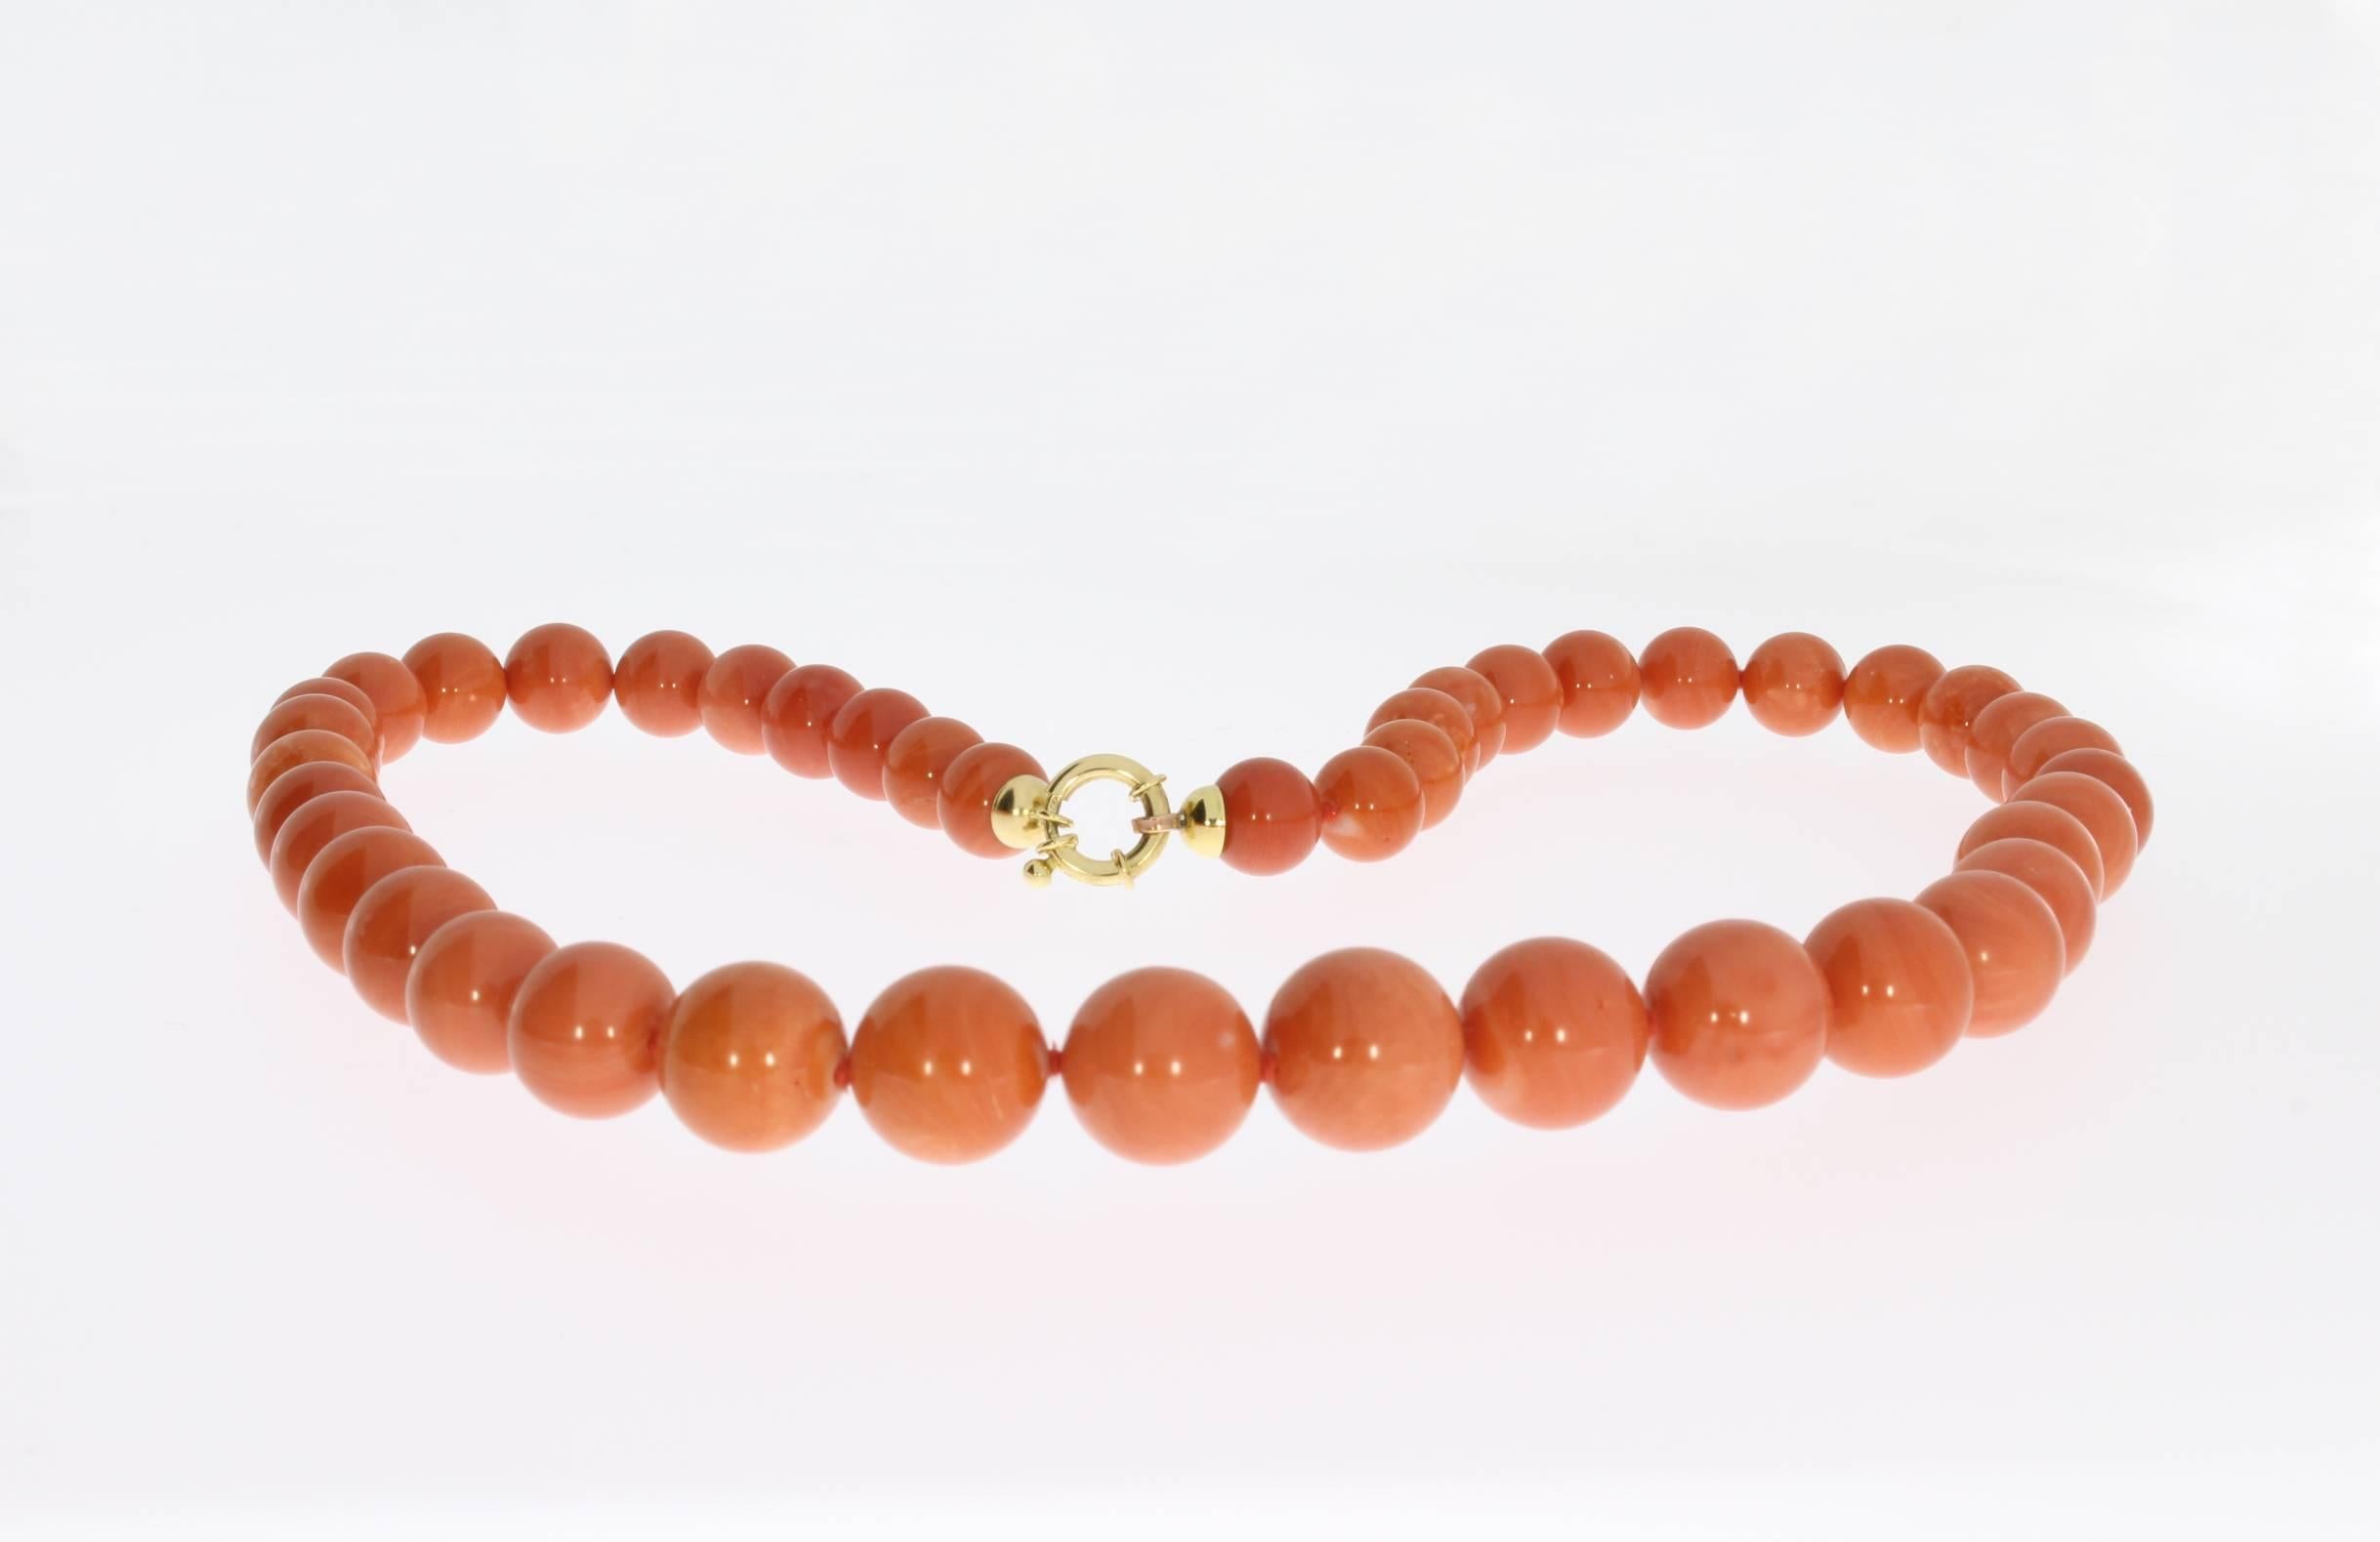 Composed of 43 coral round beads graduate from 9,6-13,2 mm in diameter. Fitted with a 18 K yellow gold clasp. Hallmarked on the clasp with the purity 750, star 668 AR. Total weight: 81,4 g. Length: 20.27 in or 51,50 cm